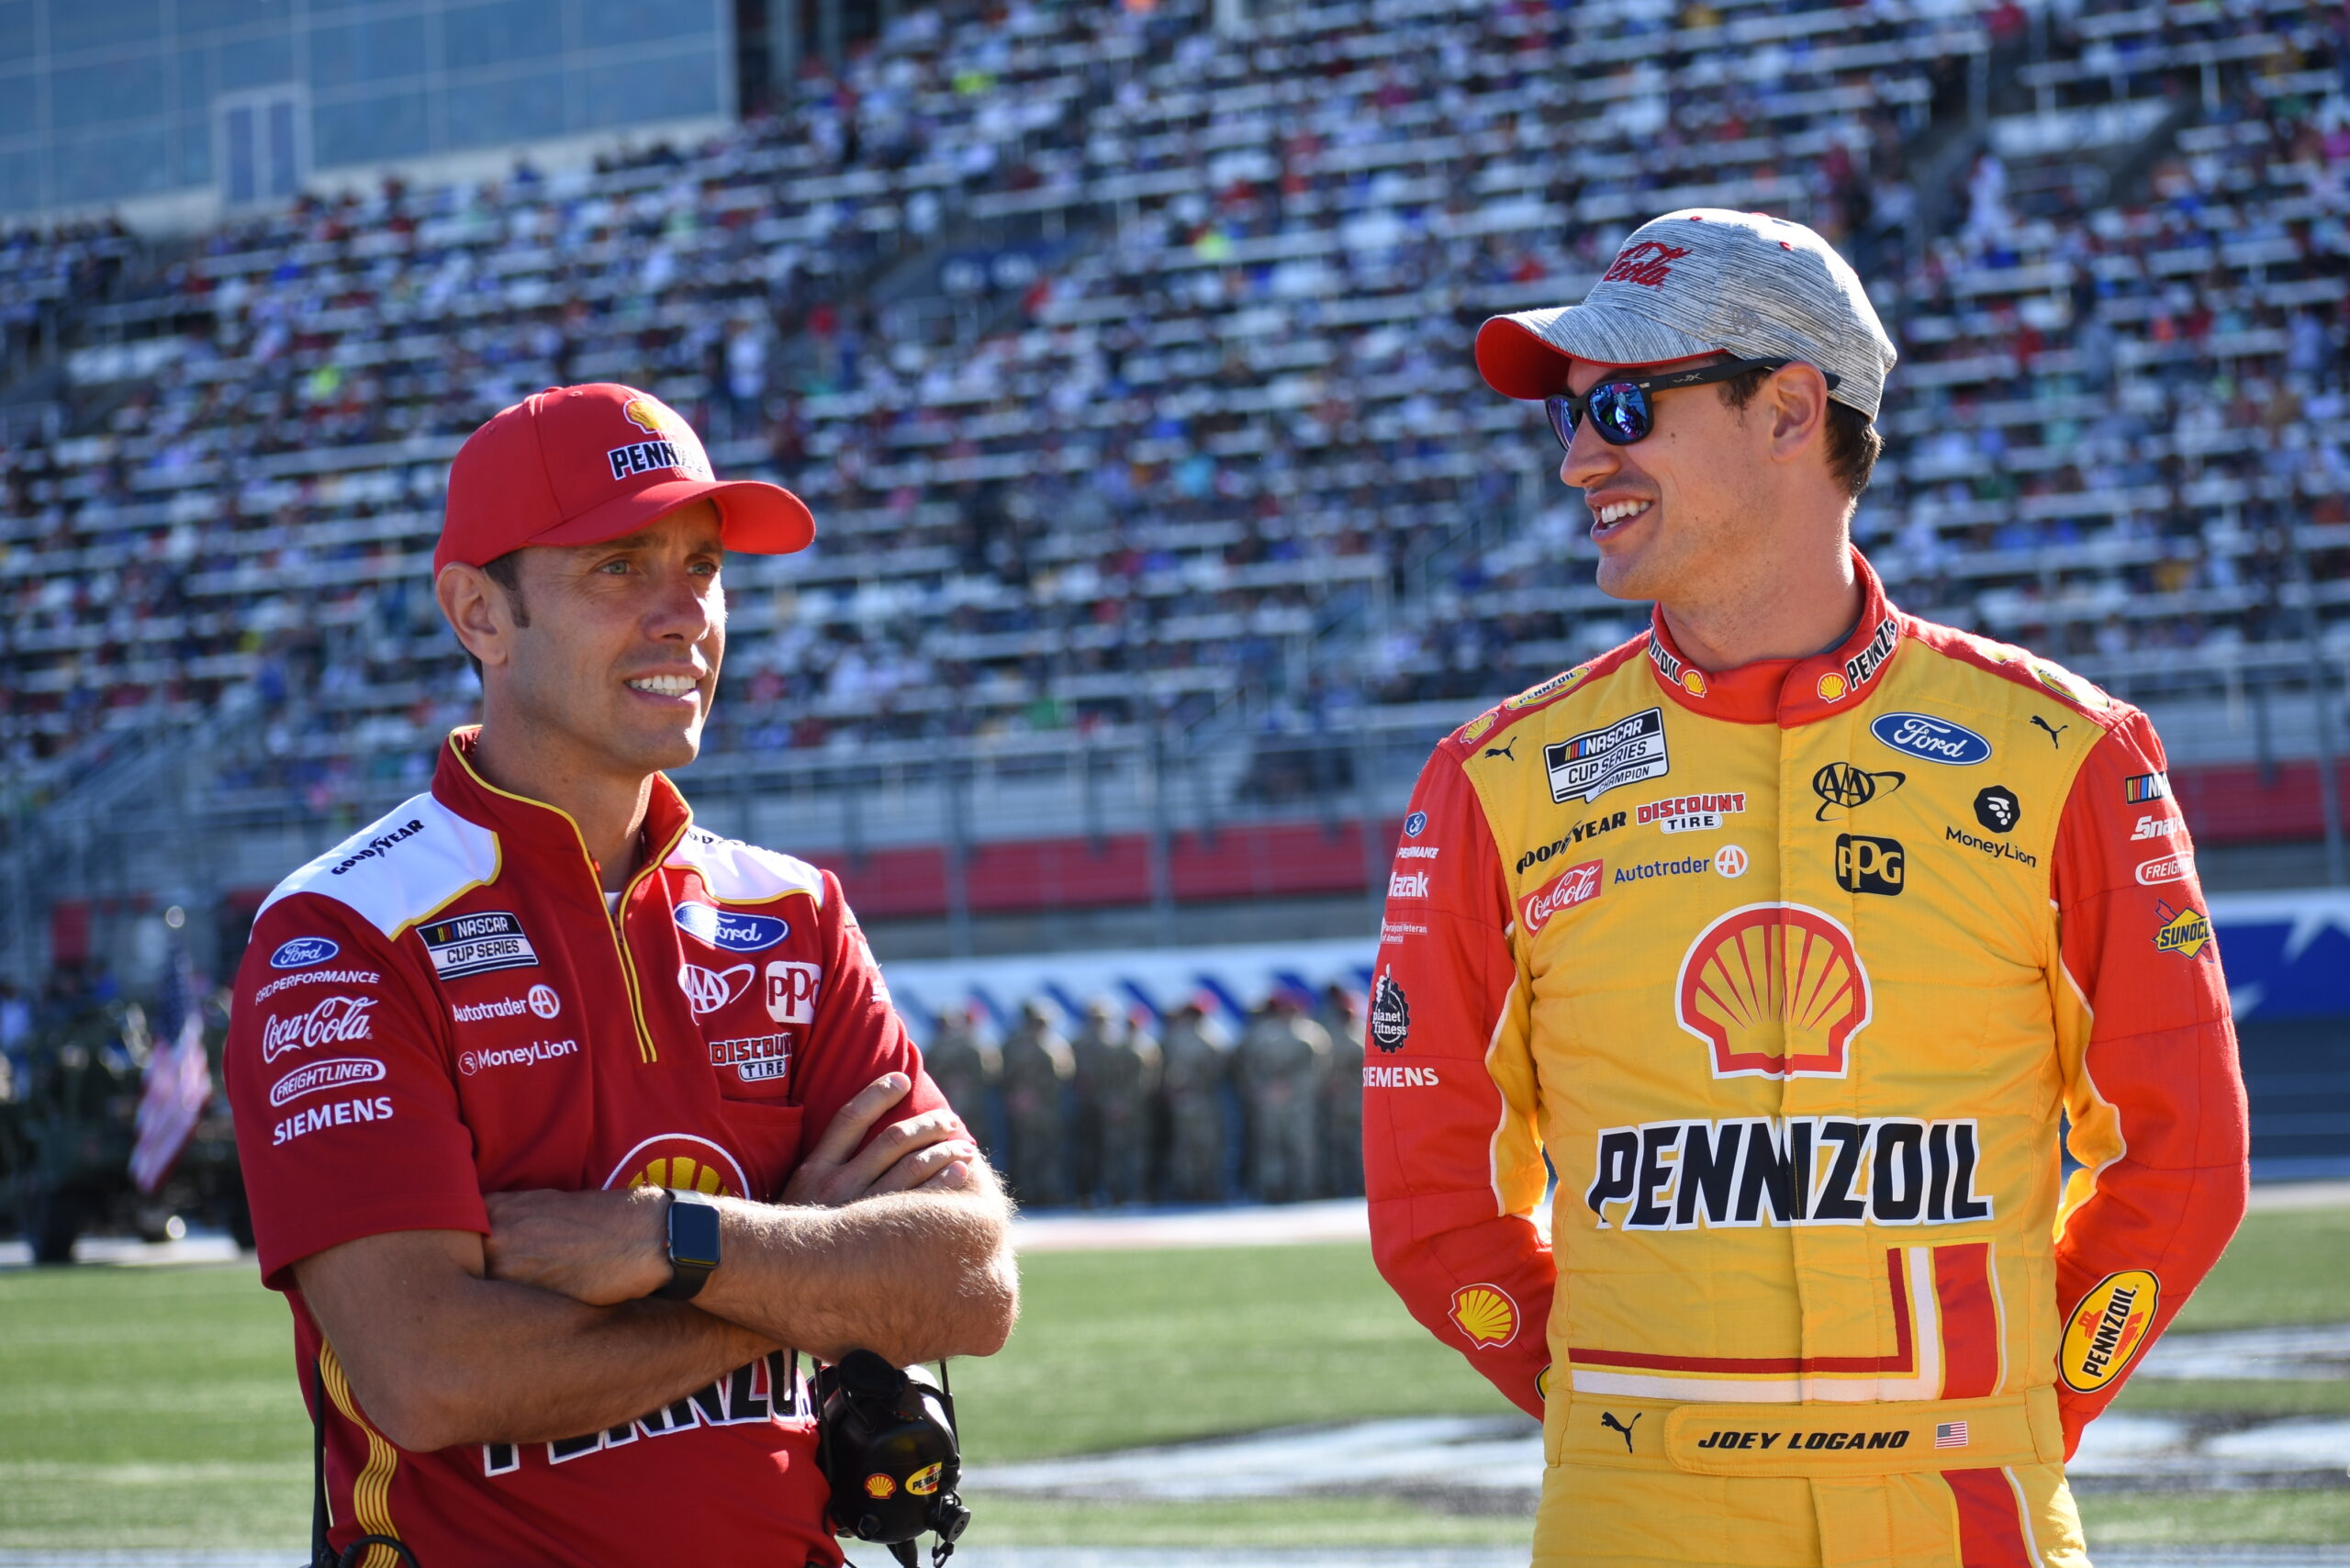 "He’s not afraid to take chances, make big swings at adjustments and that’s huge with the way we’re racing right now." - Joey Logano on crew chief Paul Wolfe. (Photo: Michael Guariglia | The Podium Finish)